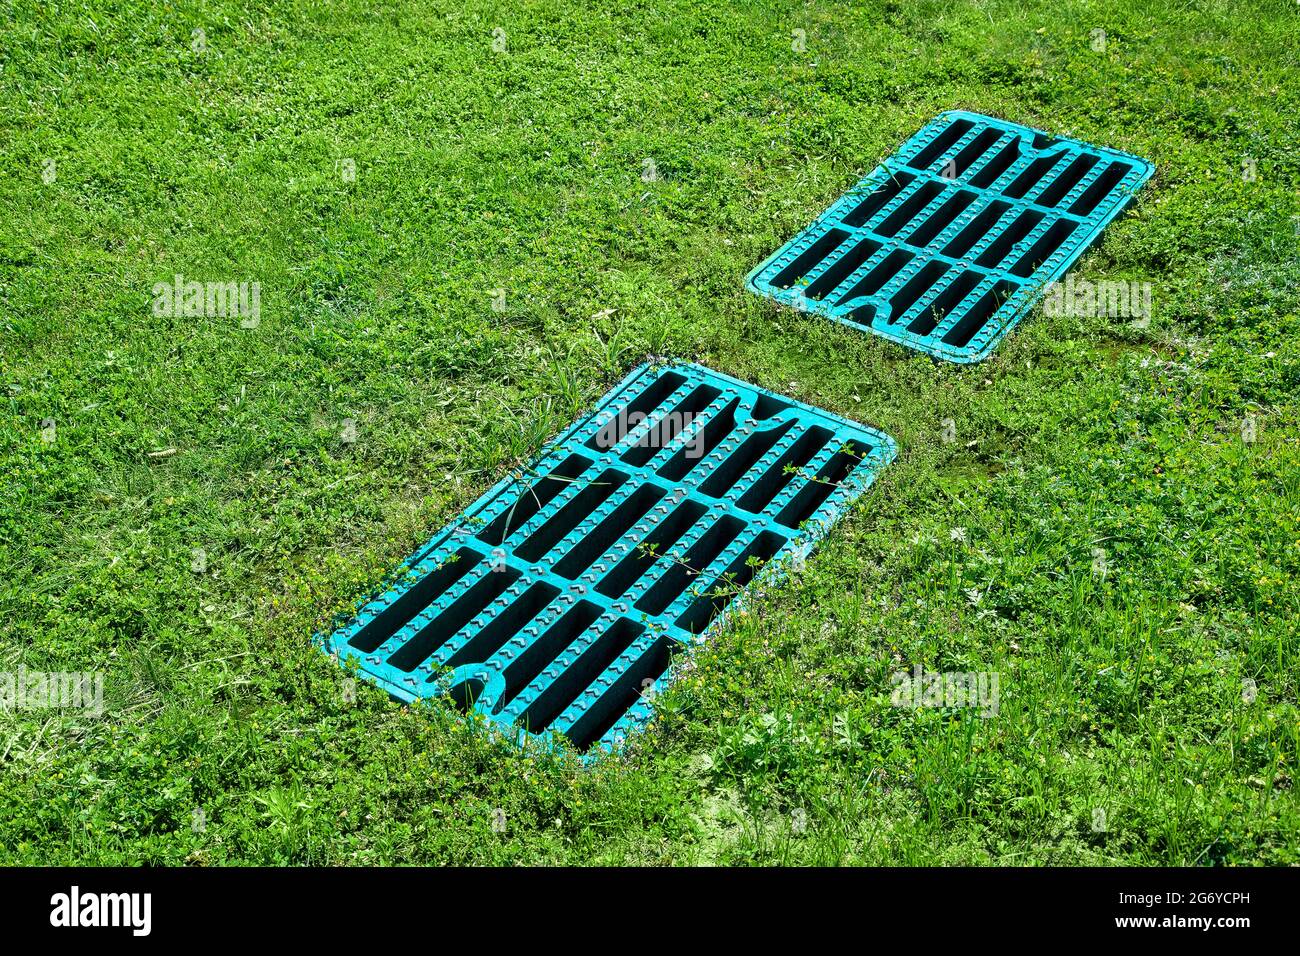 manhole drainage grates on the lawn with green grass septic tank cover, sump cesspool drainage system environment design side view with copy space, no Stock Photo